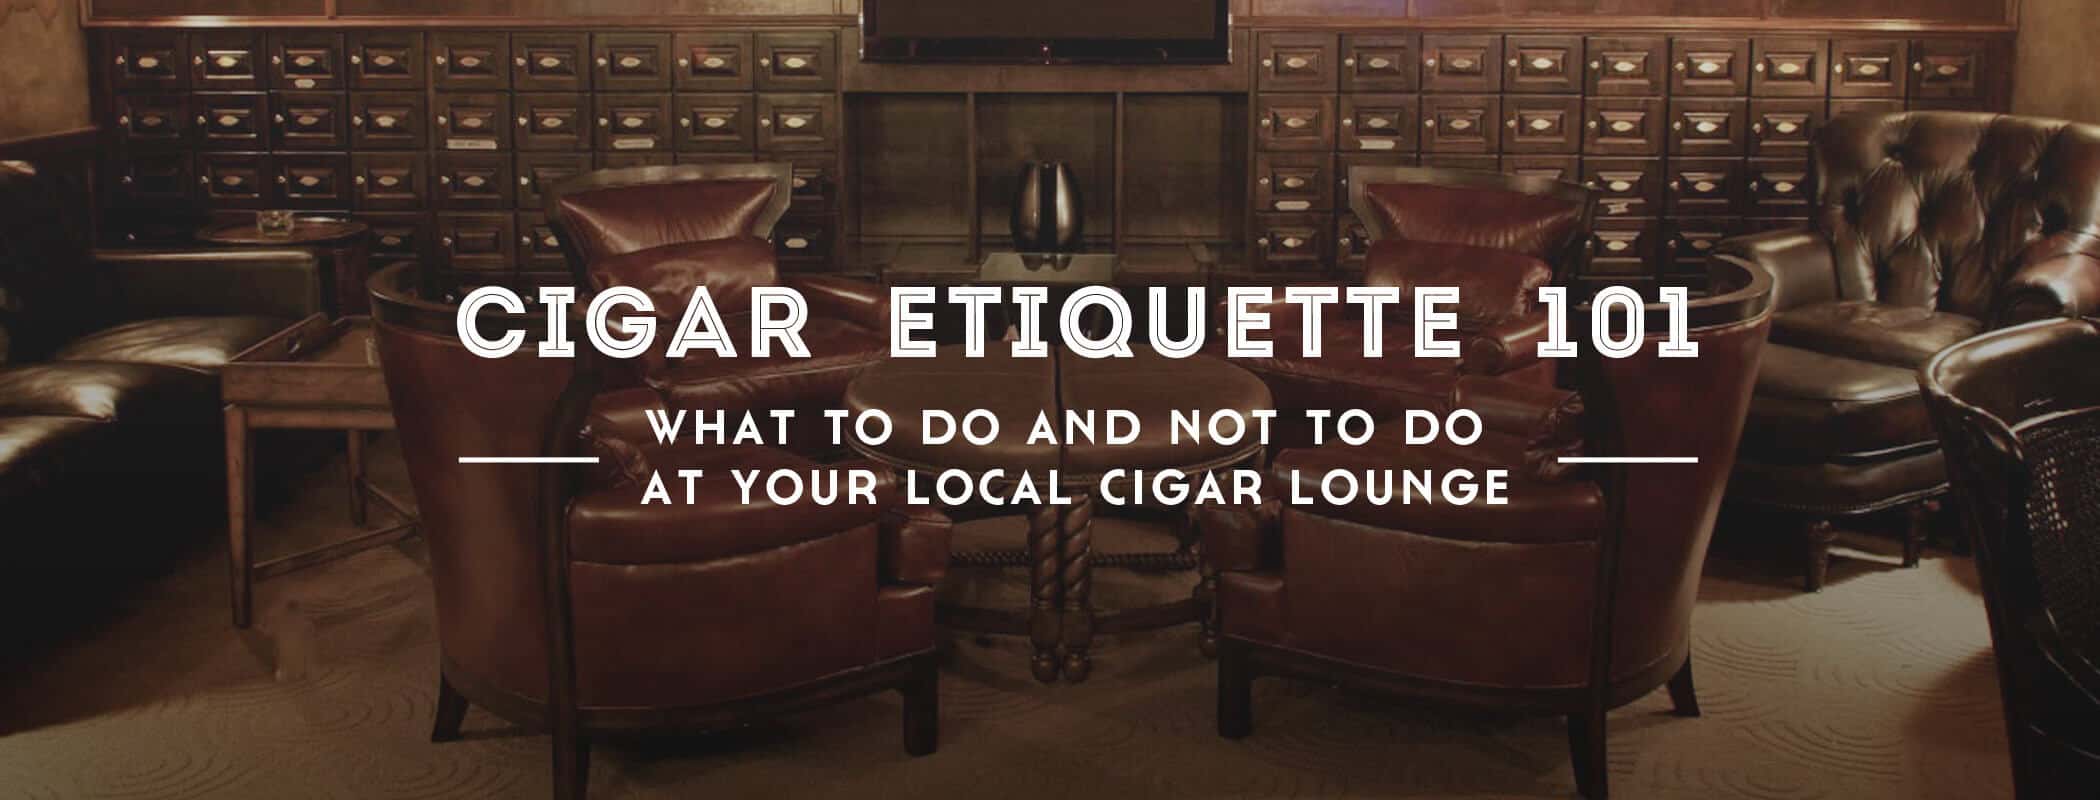 Cigar Etiquette 101 What To Do And Not To Do At Your Local Cigar Lounge